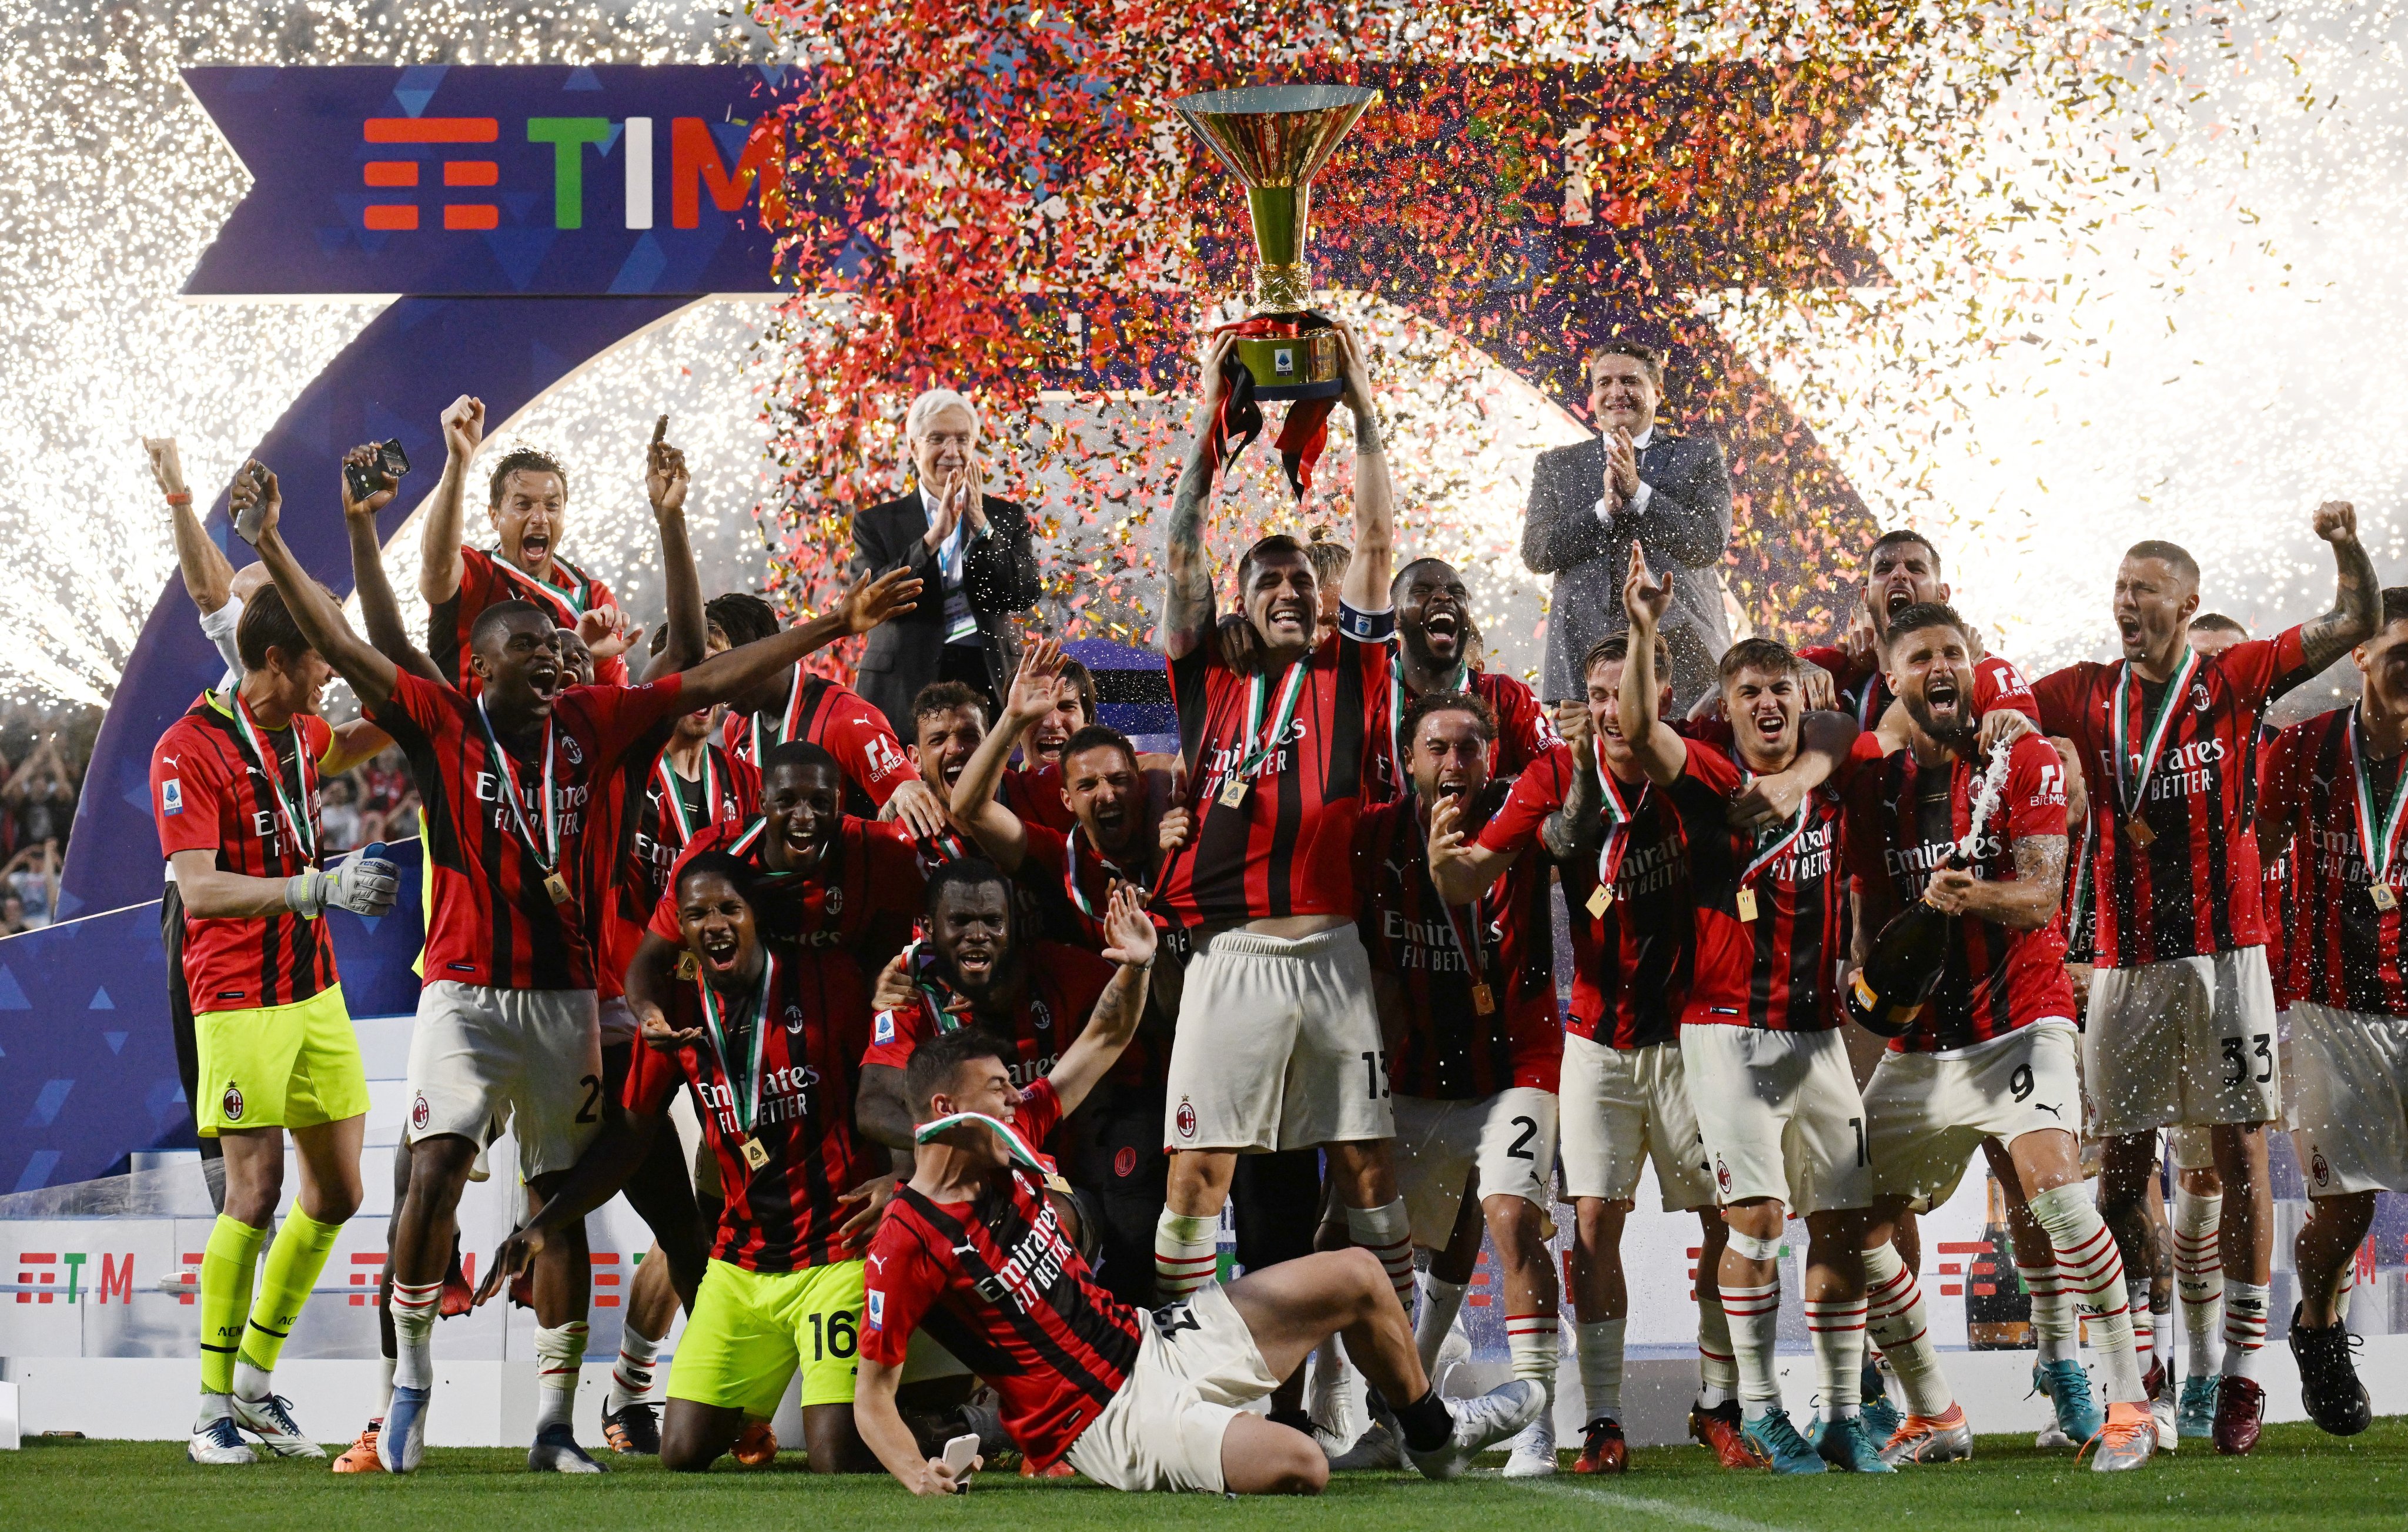 Serie Milan win first SCUDETTO years